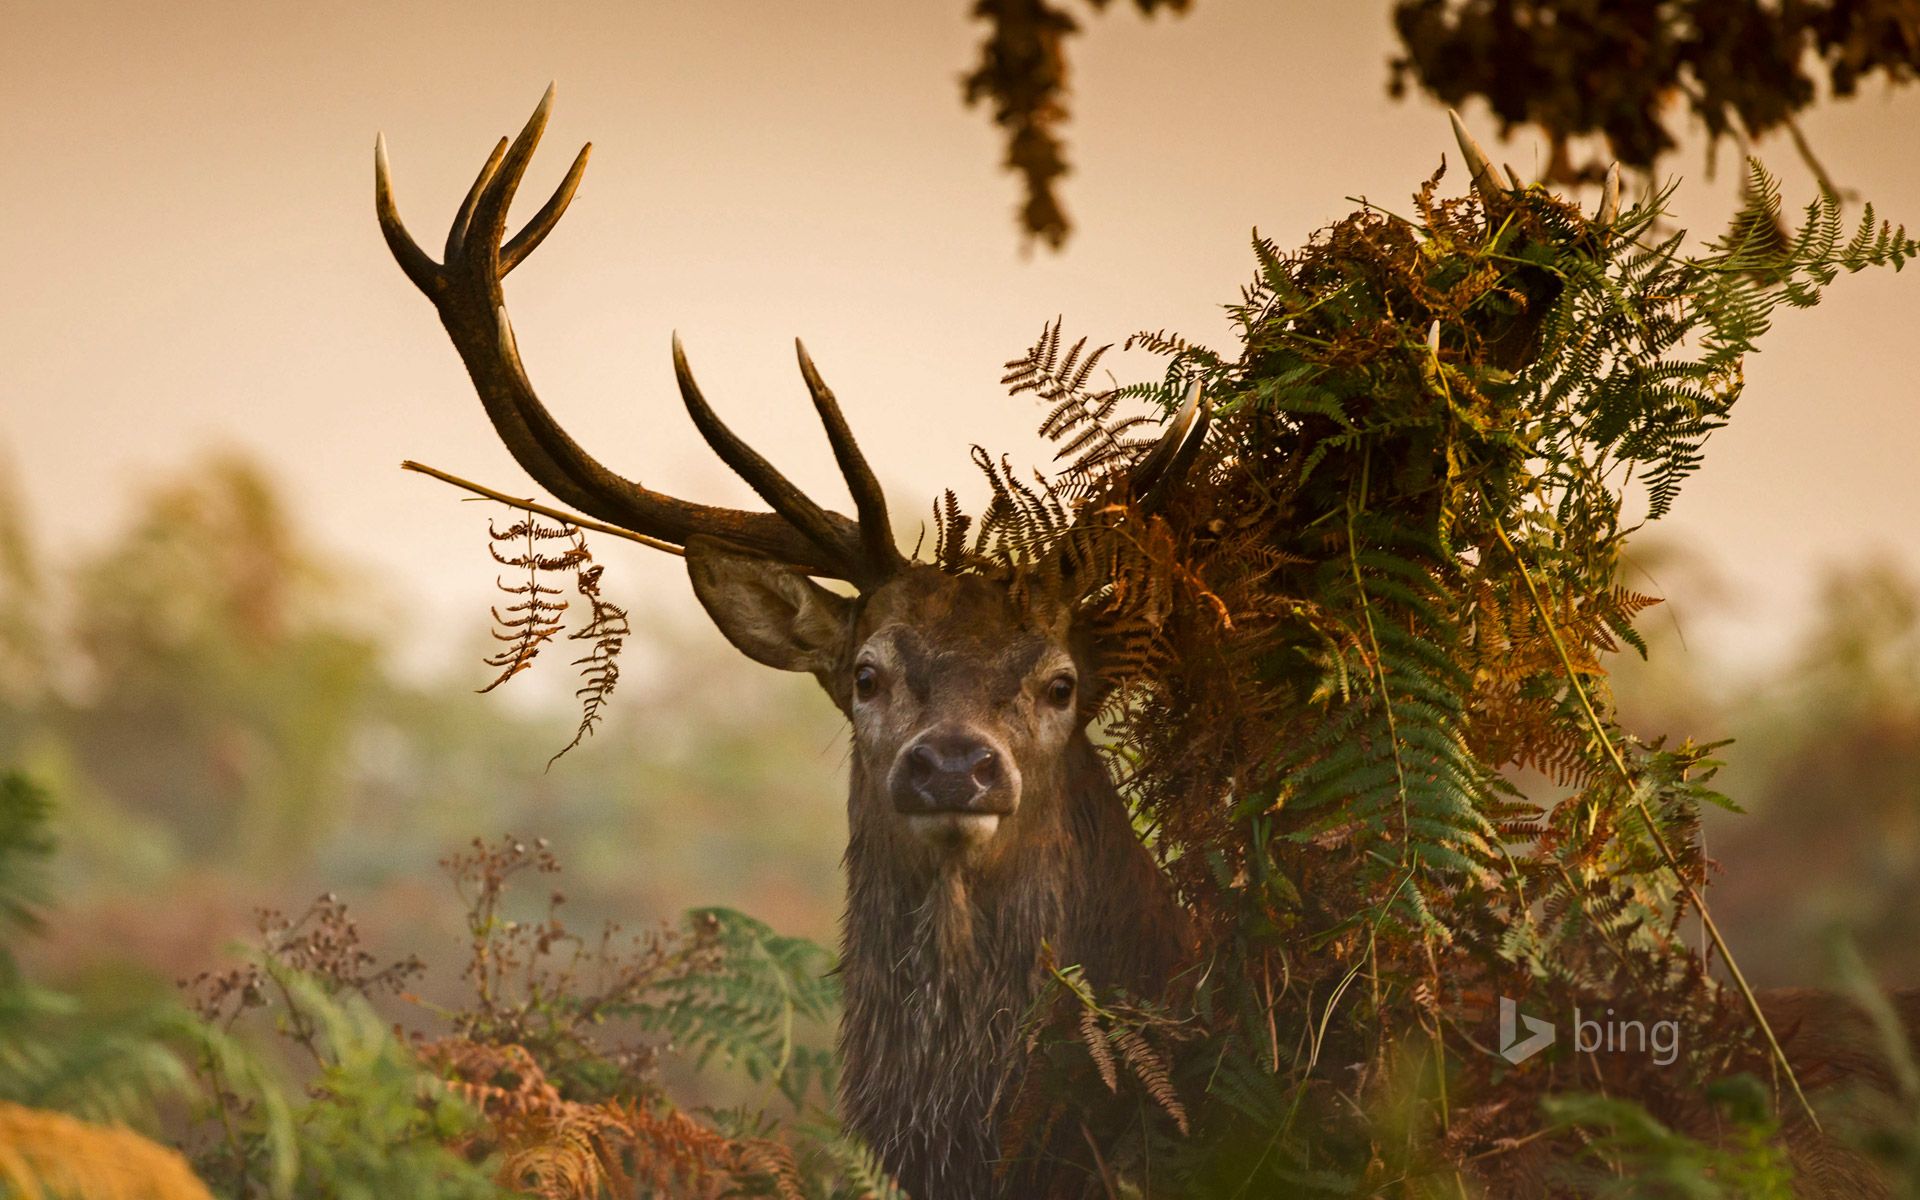 A male red deer in London's Richmond Park